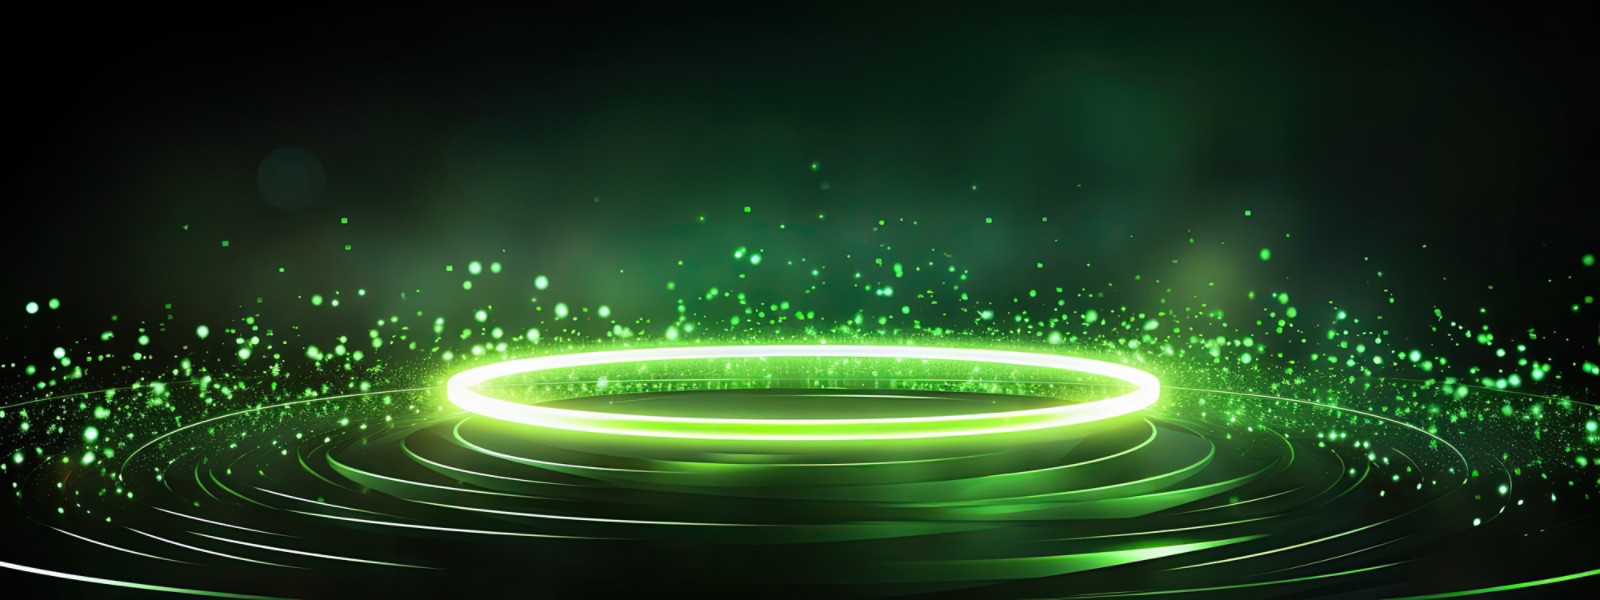 Speed light movement technology hitech modern background. Green abstract dot background, data network futuristic. circle wave line internet. banner, poster, cover template design